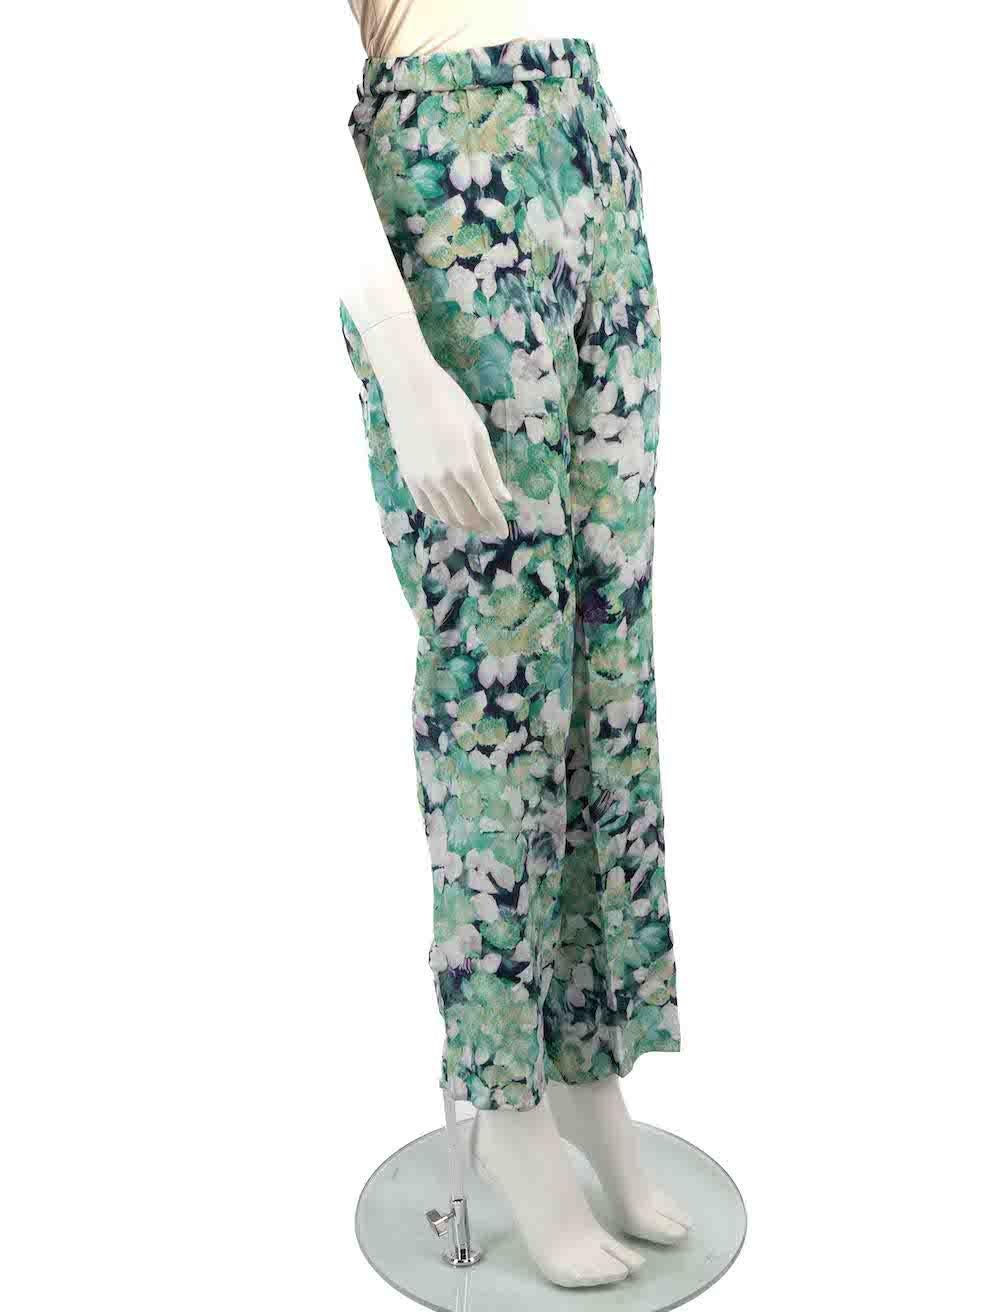 CONDITION is Very good. Hardly any visible wear to trousers is evident on this used Dries Van Noten designer resale item.
 
 Details
 Green
 Viscose
 Tapered trousers
 Floral print pattern
 Elasticated waistband
 Drawstring on waistband
 2x Front